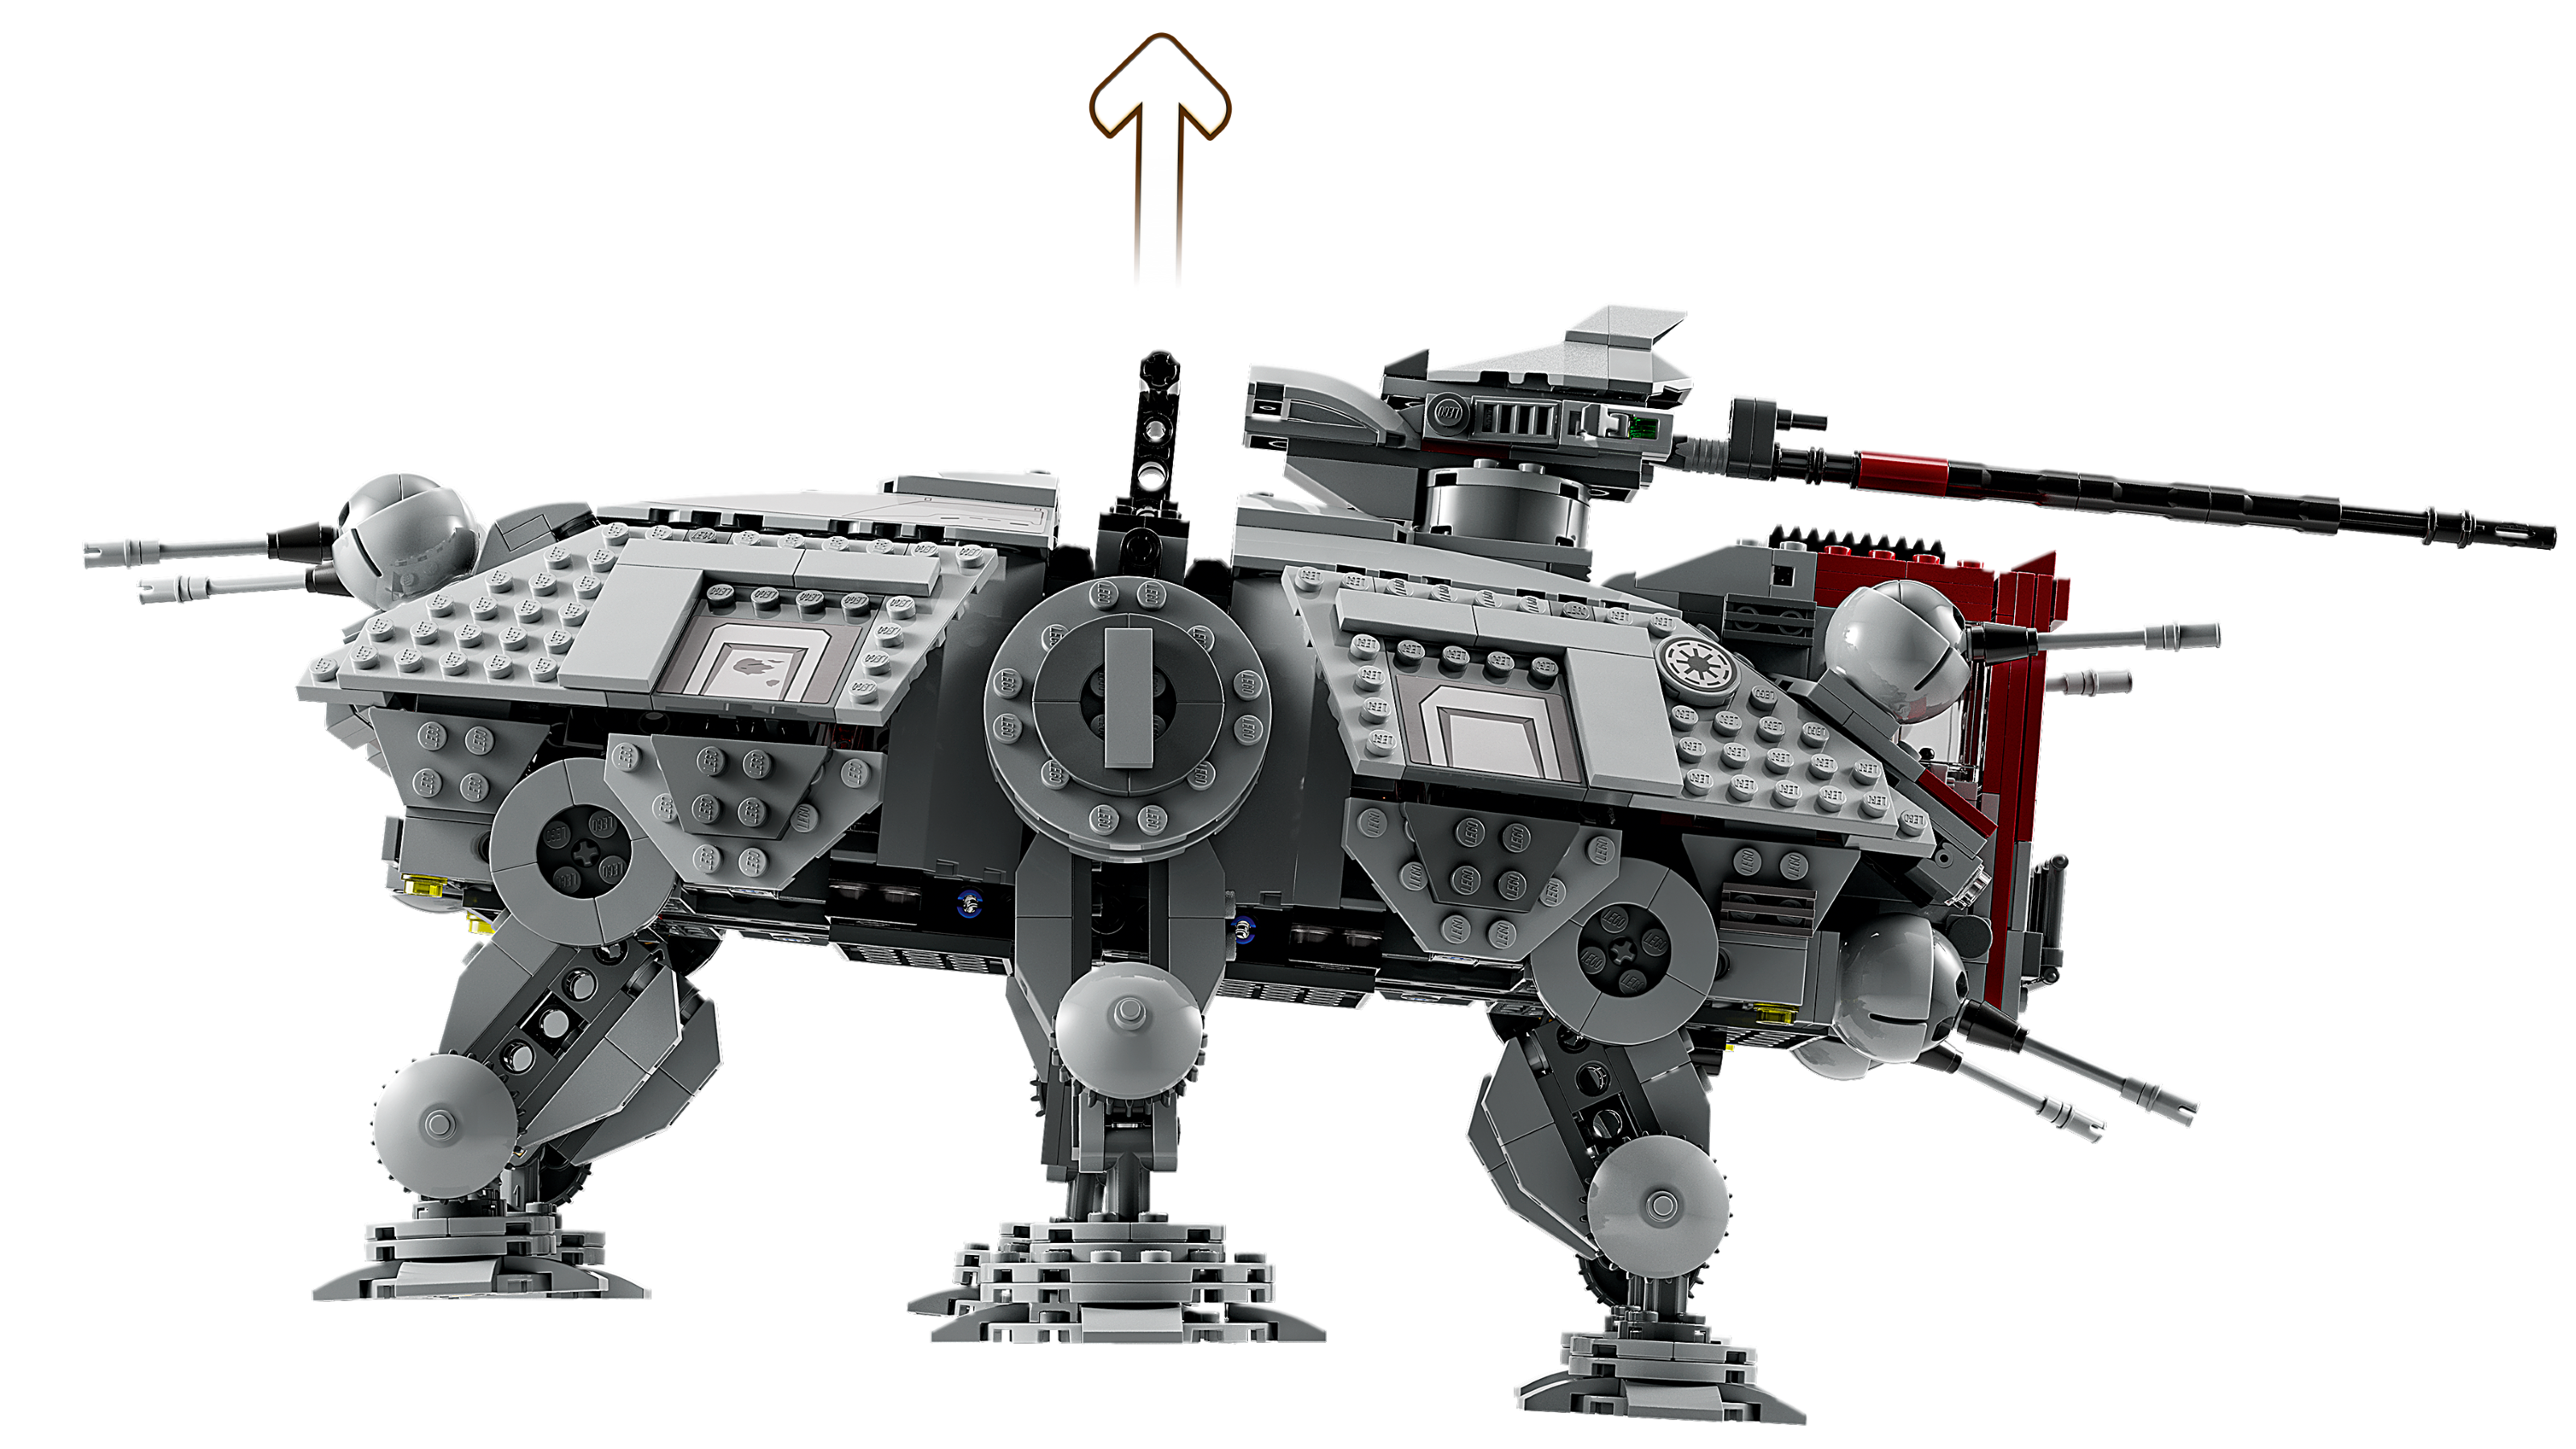 AT-TE™ Walker 75337 | Star Wars™ | Buy online at the Official LEGO 